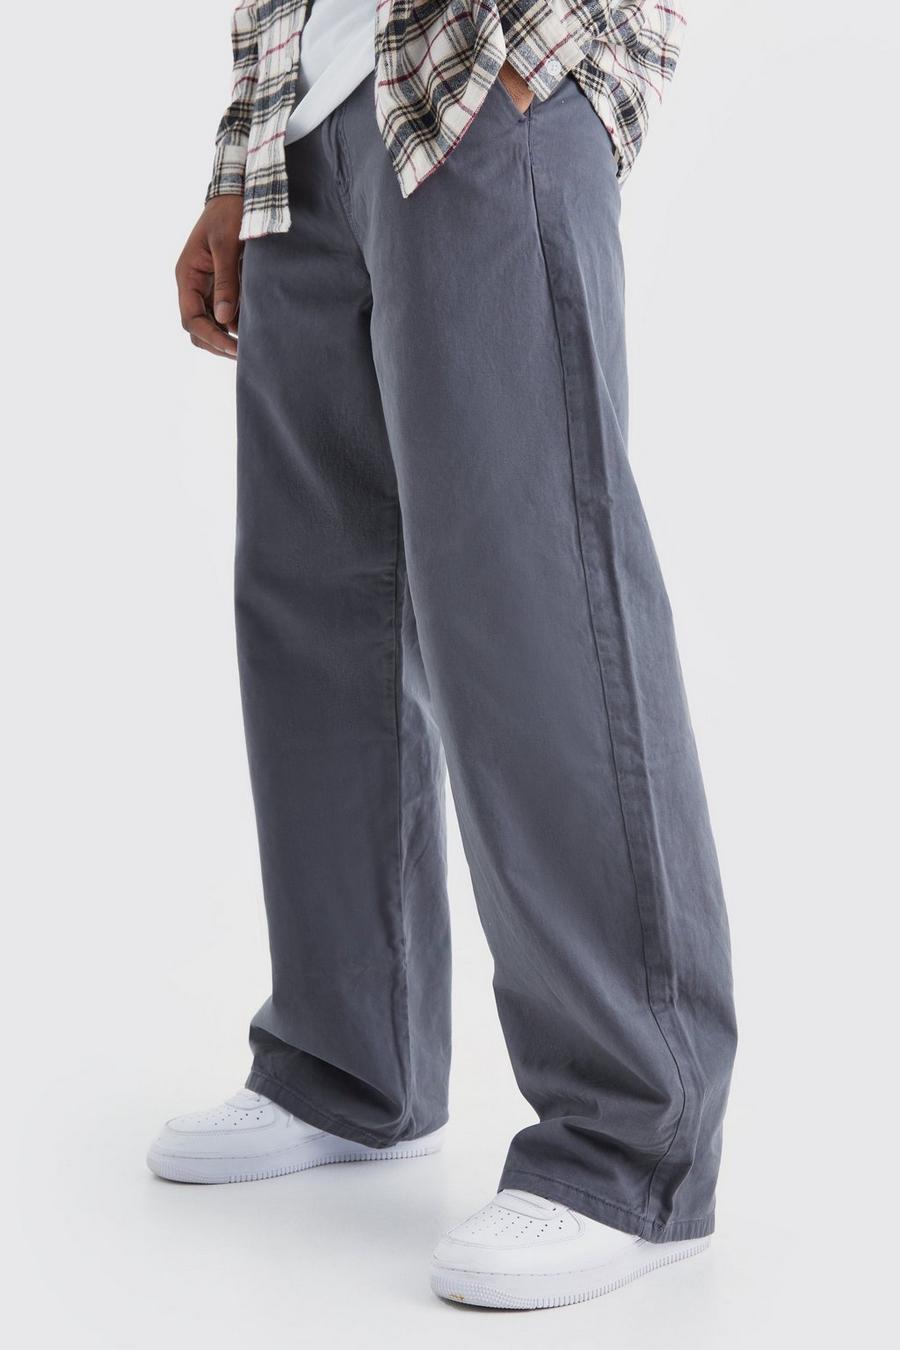 Tall Chino-Hose mit weitem Bein, Charcoal